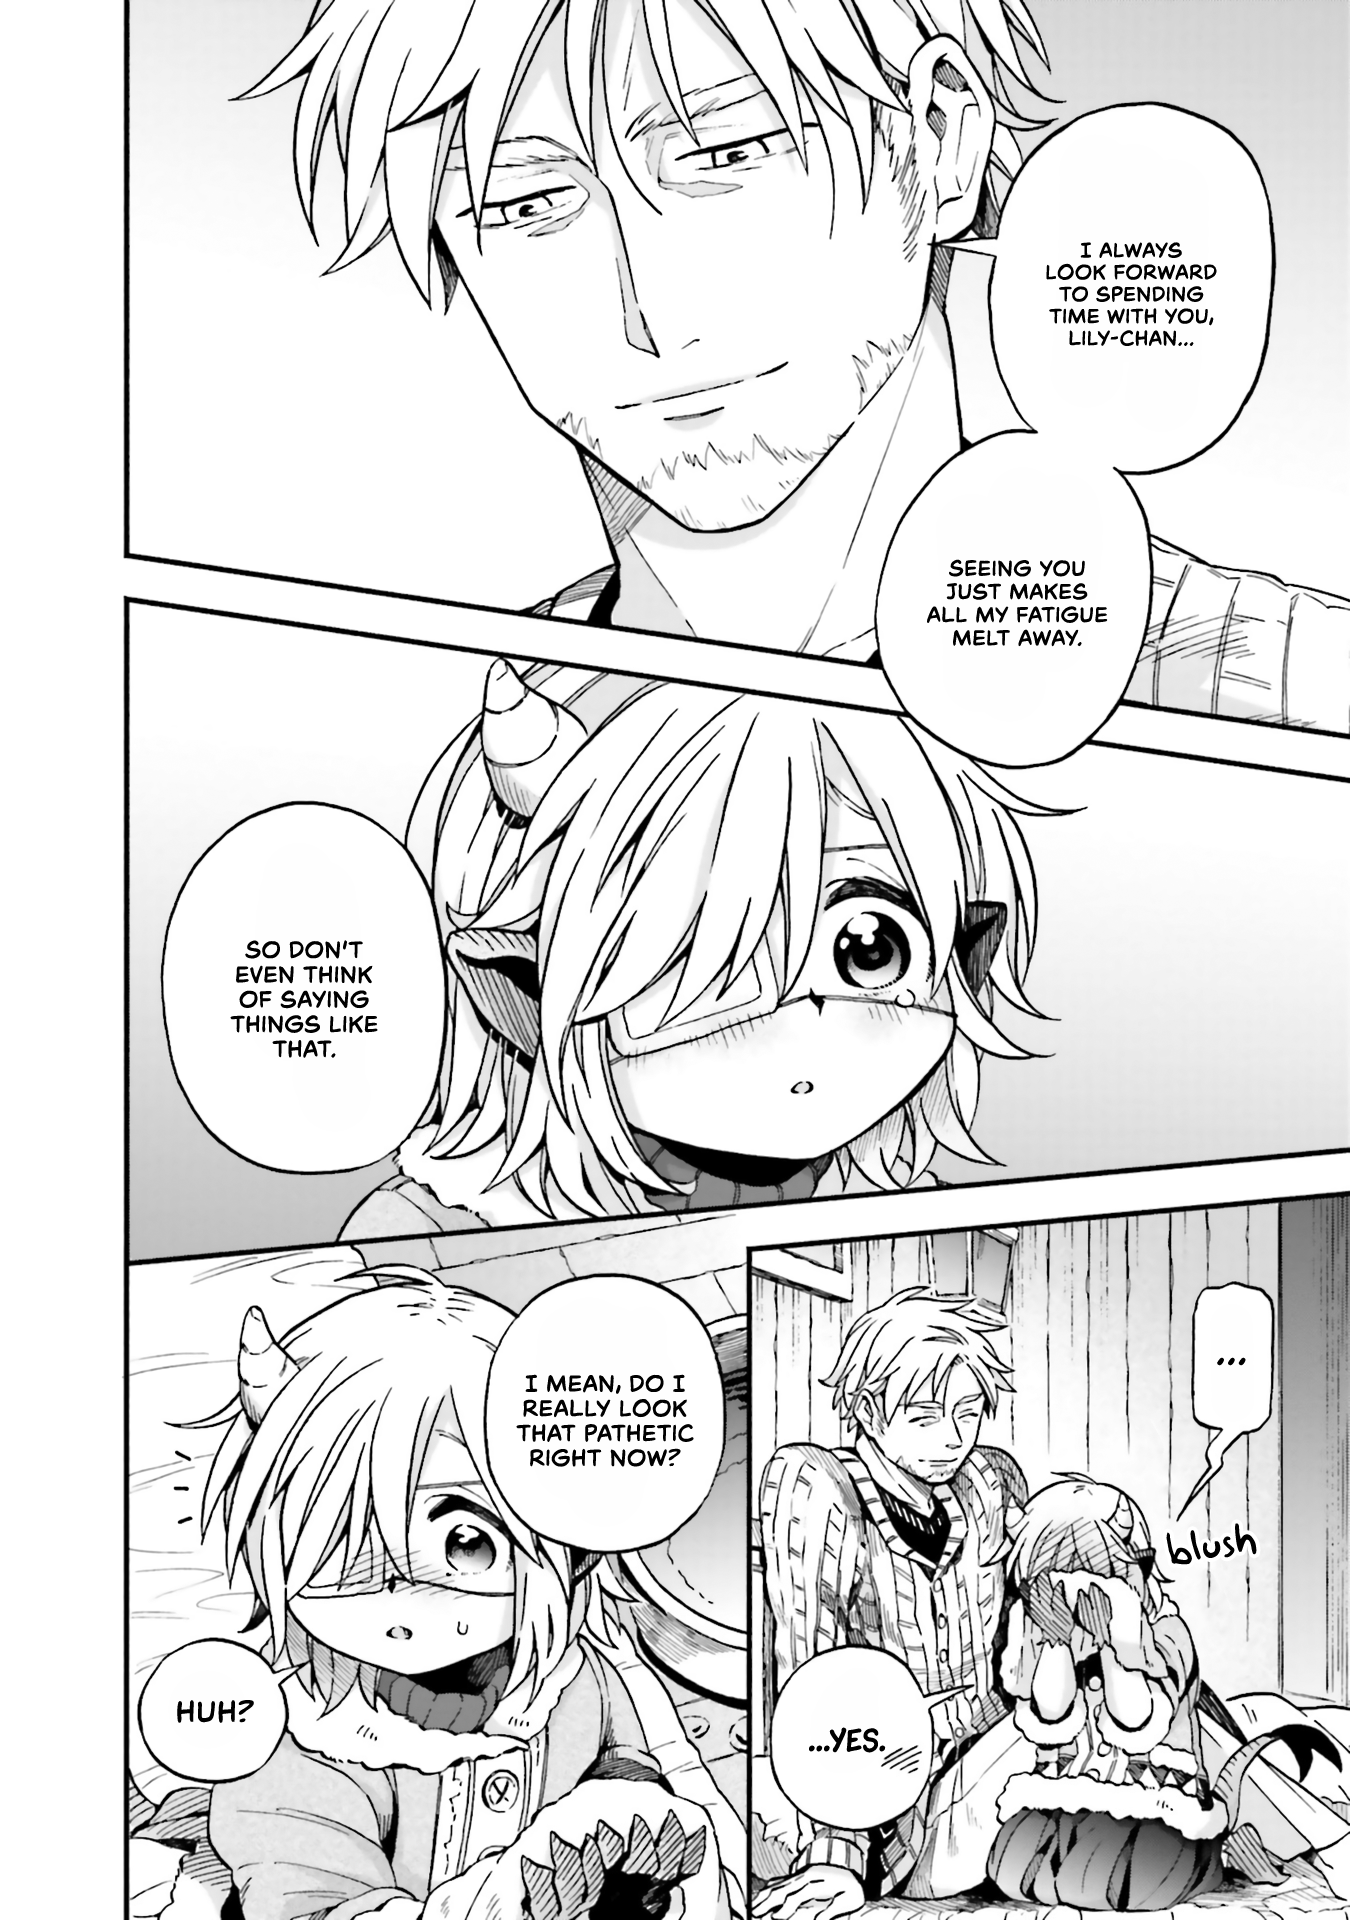 Exorcist and Devil-chan - chapter 26.5 - #5